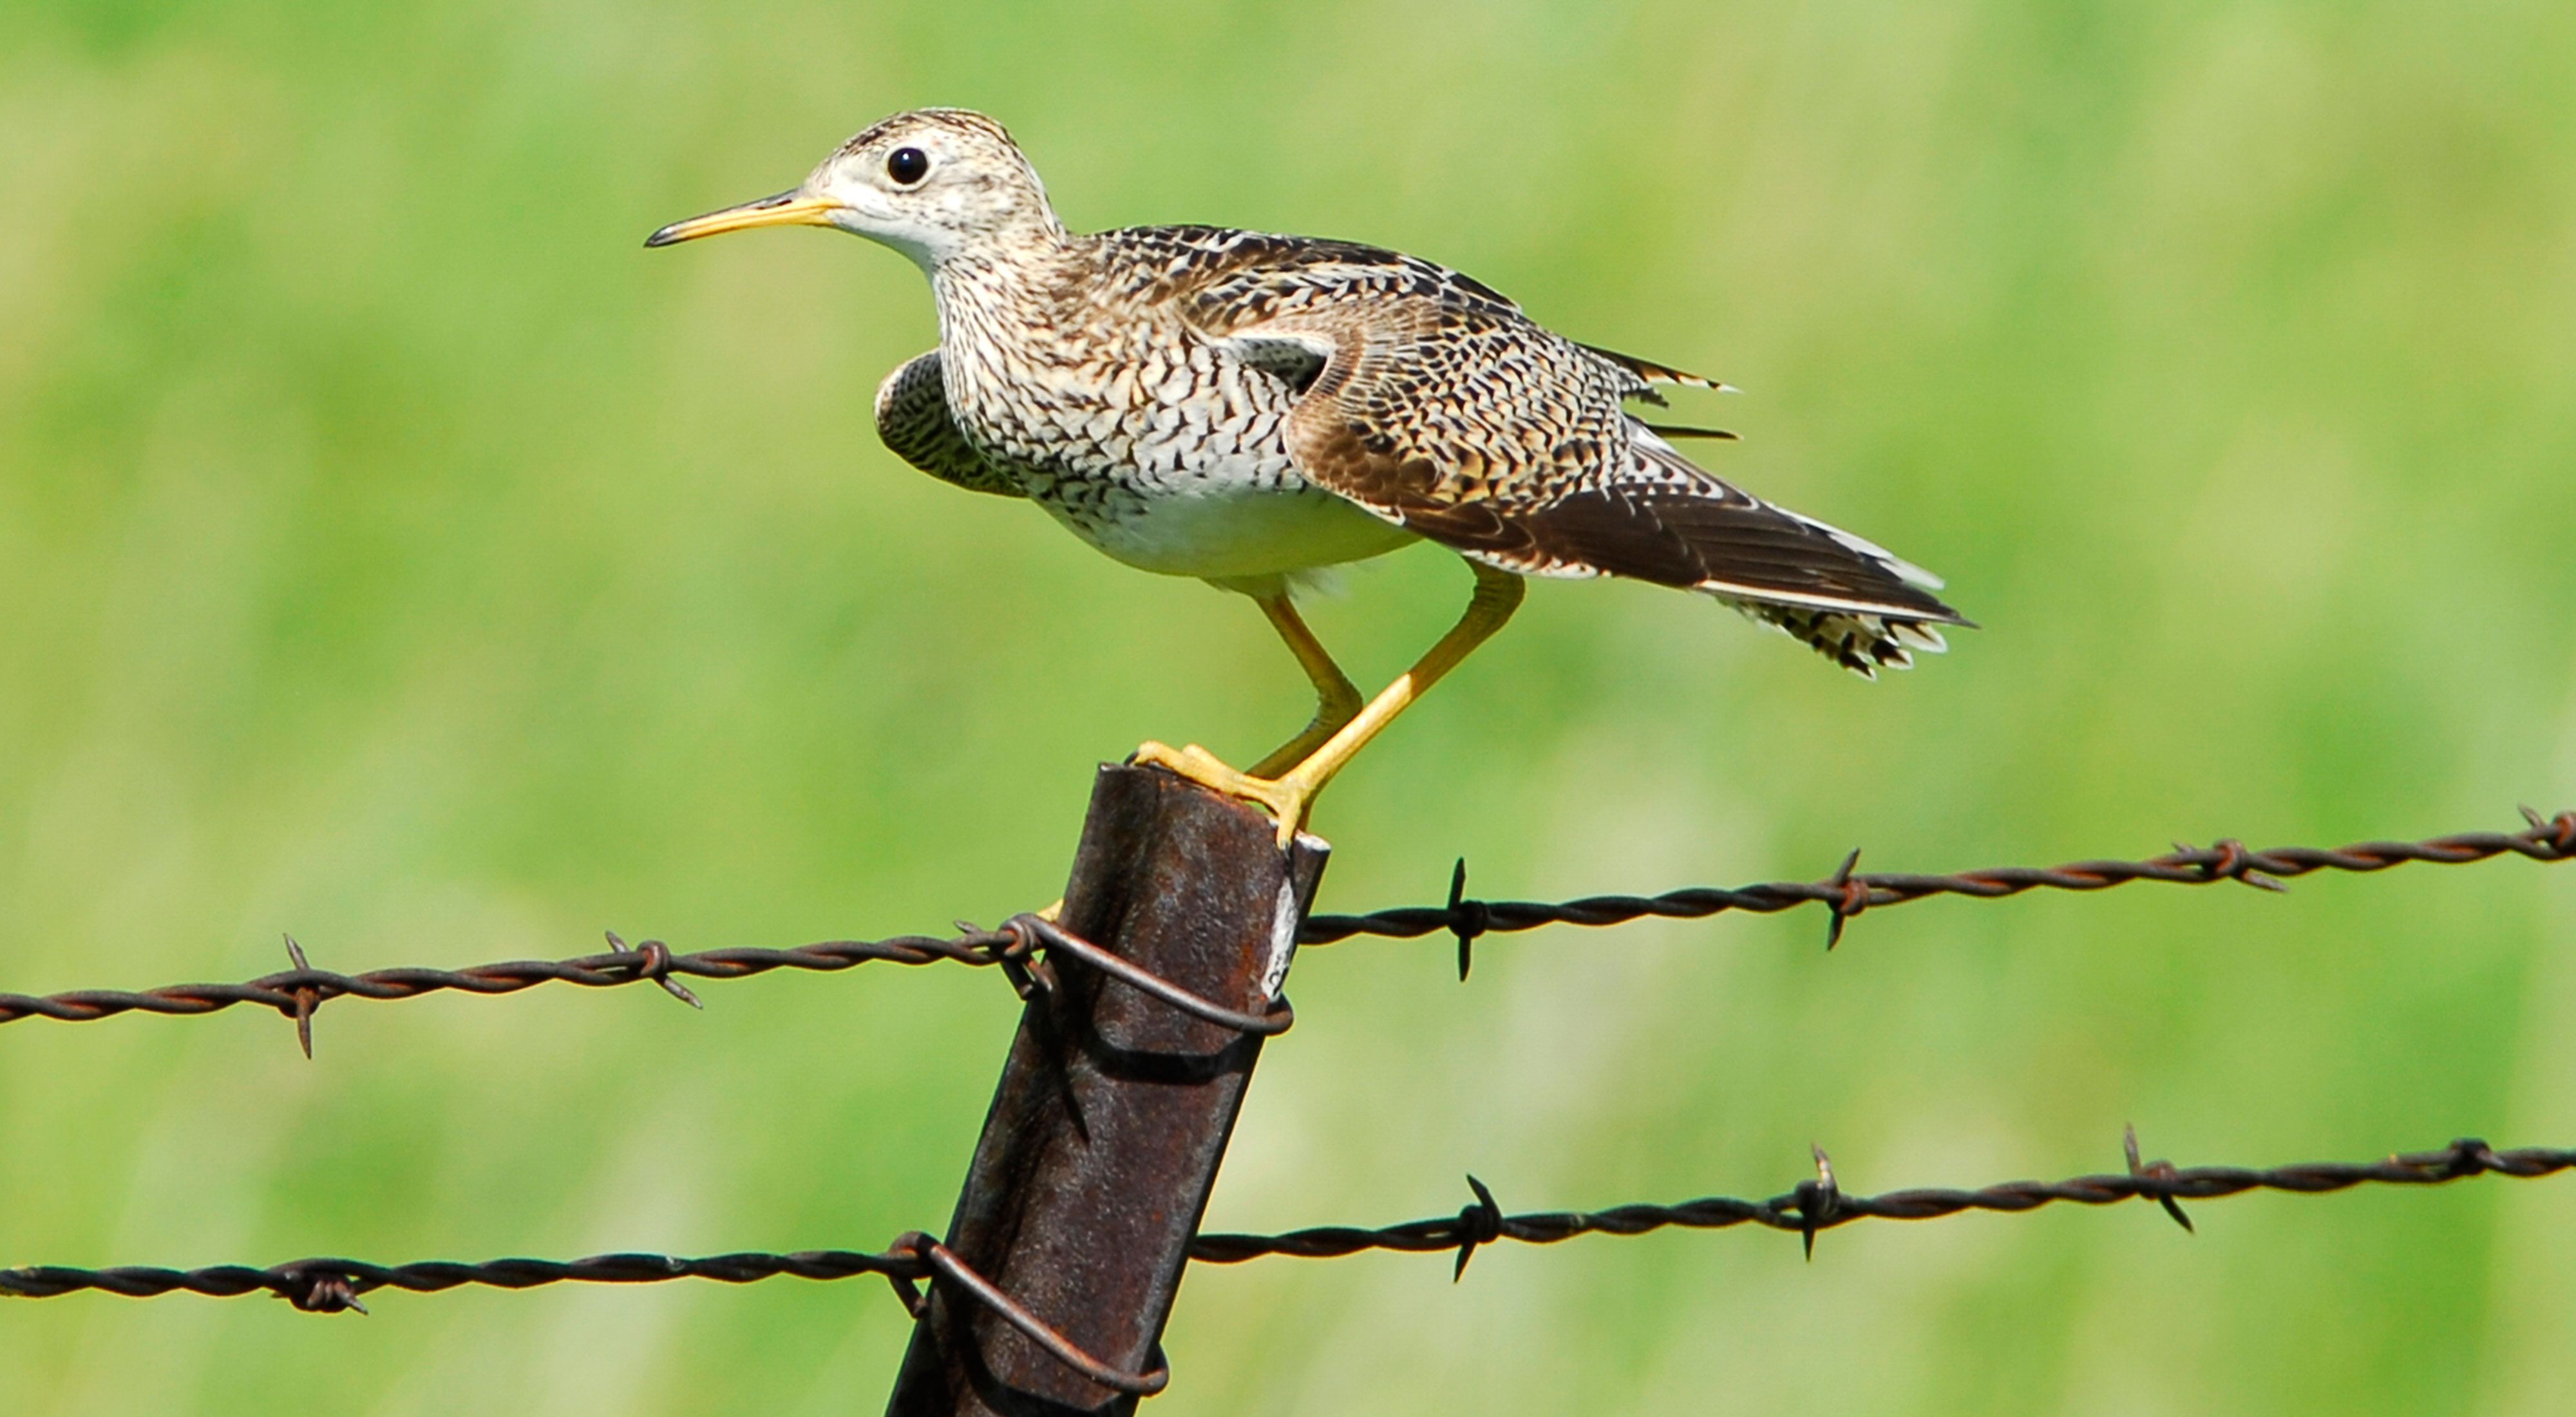 Close-up view of an Upland sandpiper on a fence post.